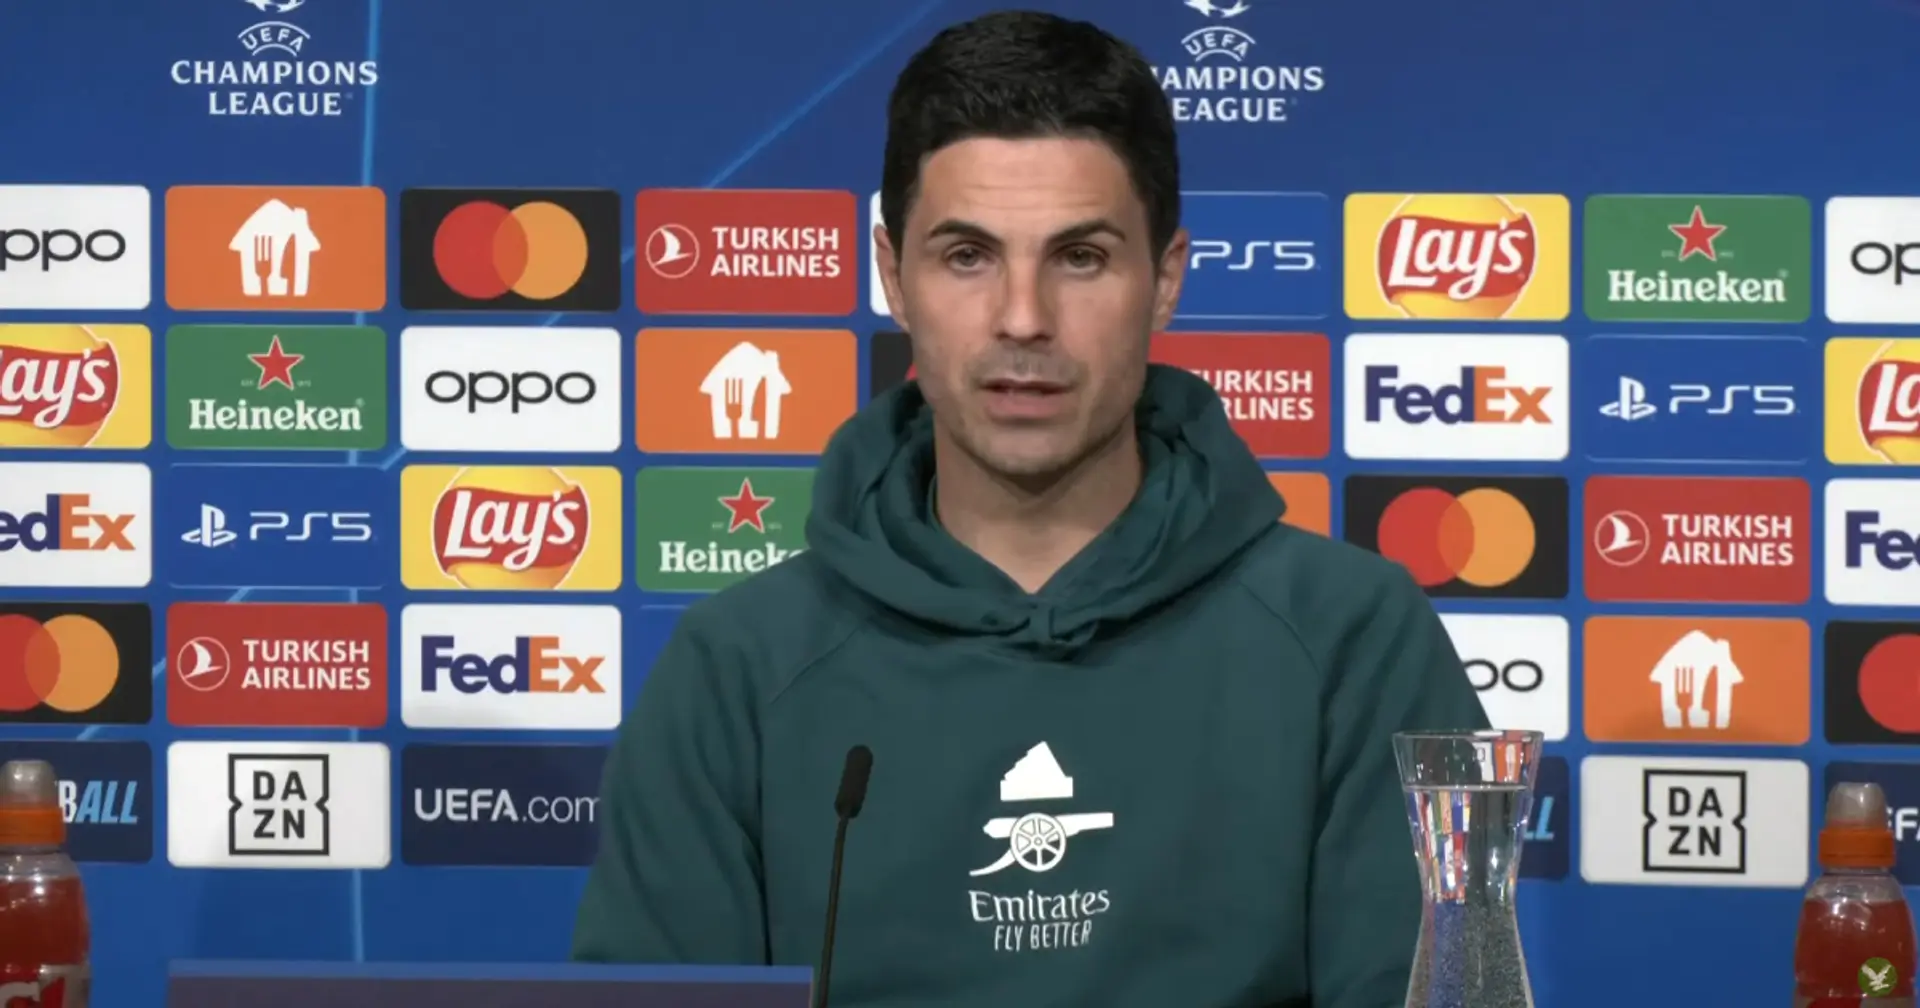 'Everything we've worked for since last season': Mikel Arteta on historic significance of Bayern clash